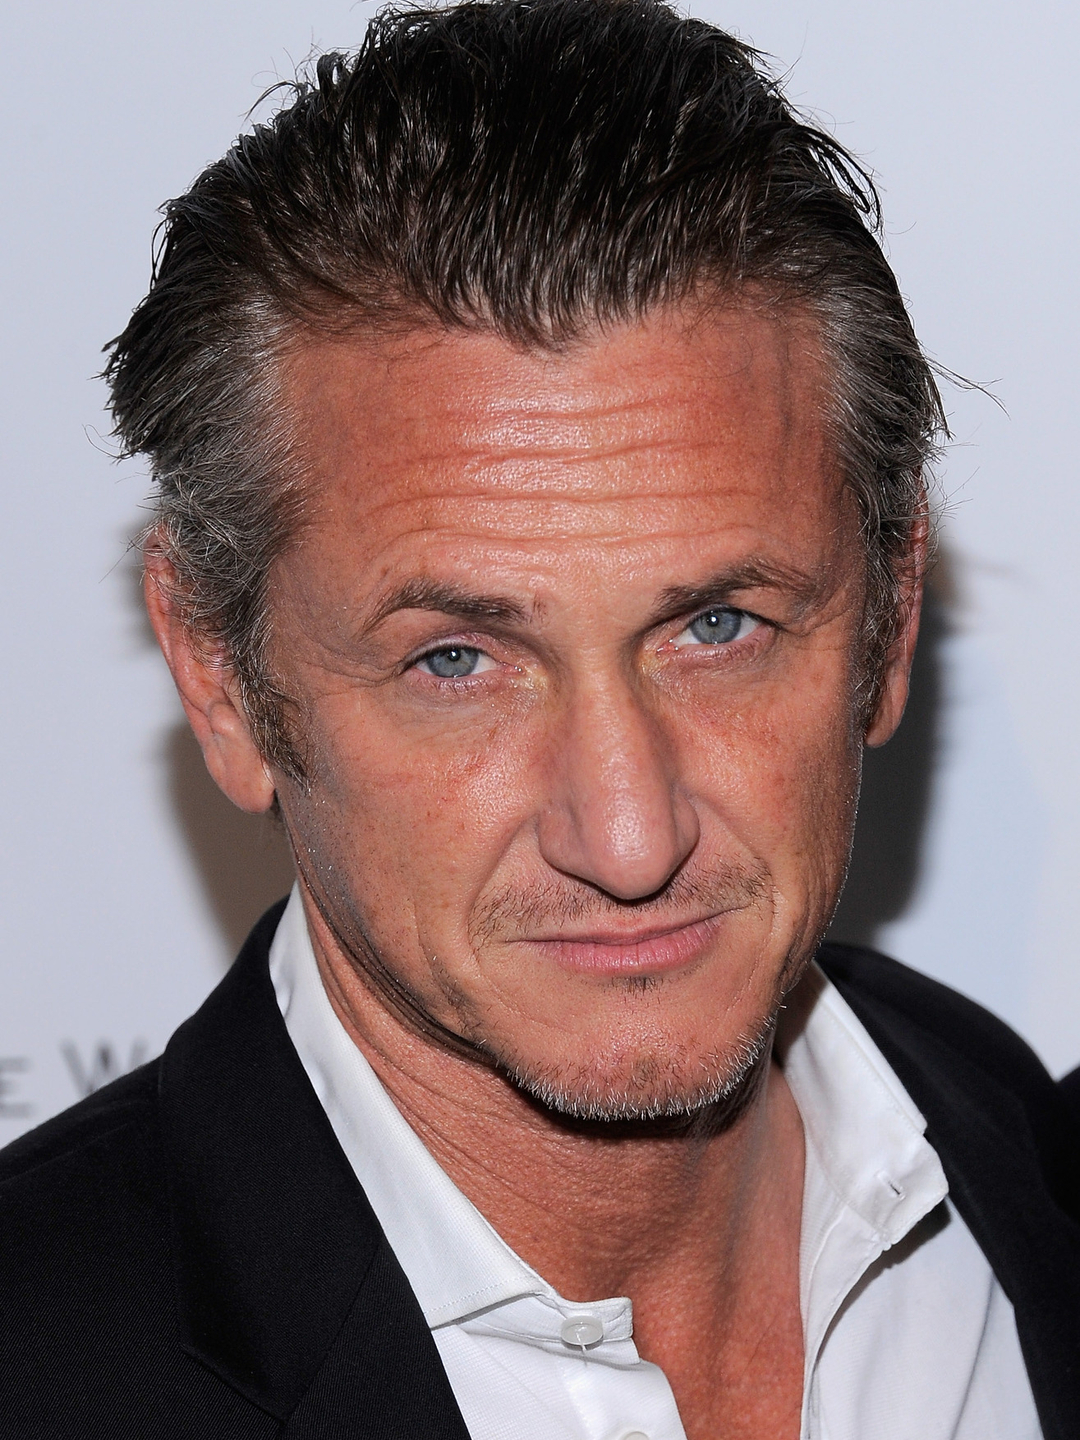 Sean Penn who is his mother